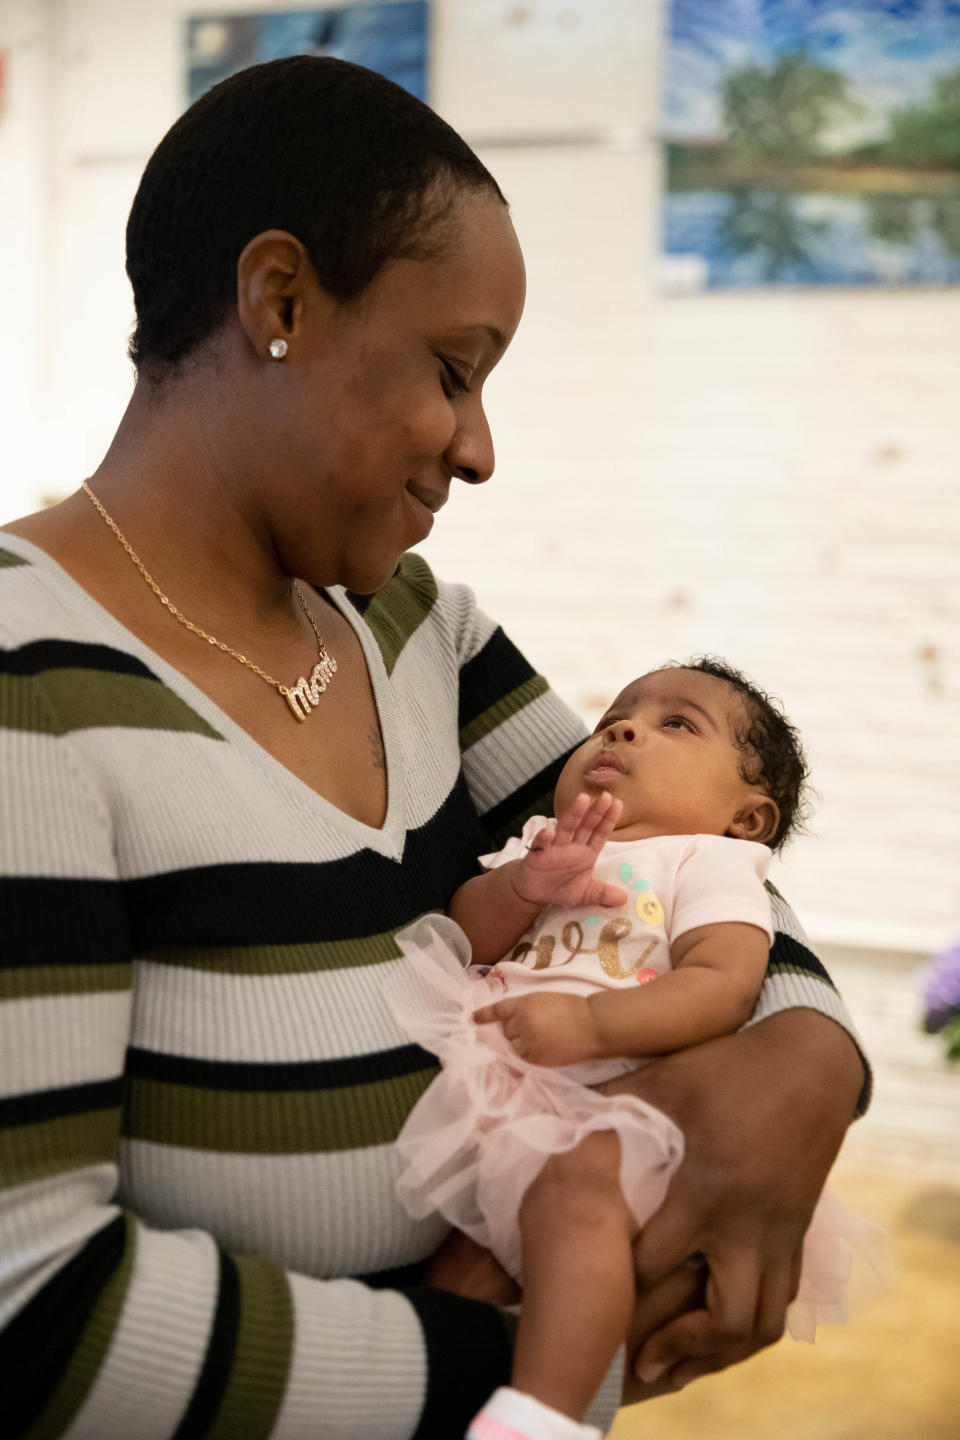 Mother of the Year awardee Quiana Frazier holds her two-month-old daughter Honey during the event hosted by Lamb Center for Arts and Healing at Guncotton Coffee in Hopewell, Va. on May 7, 2022.